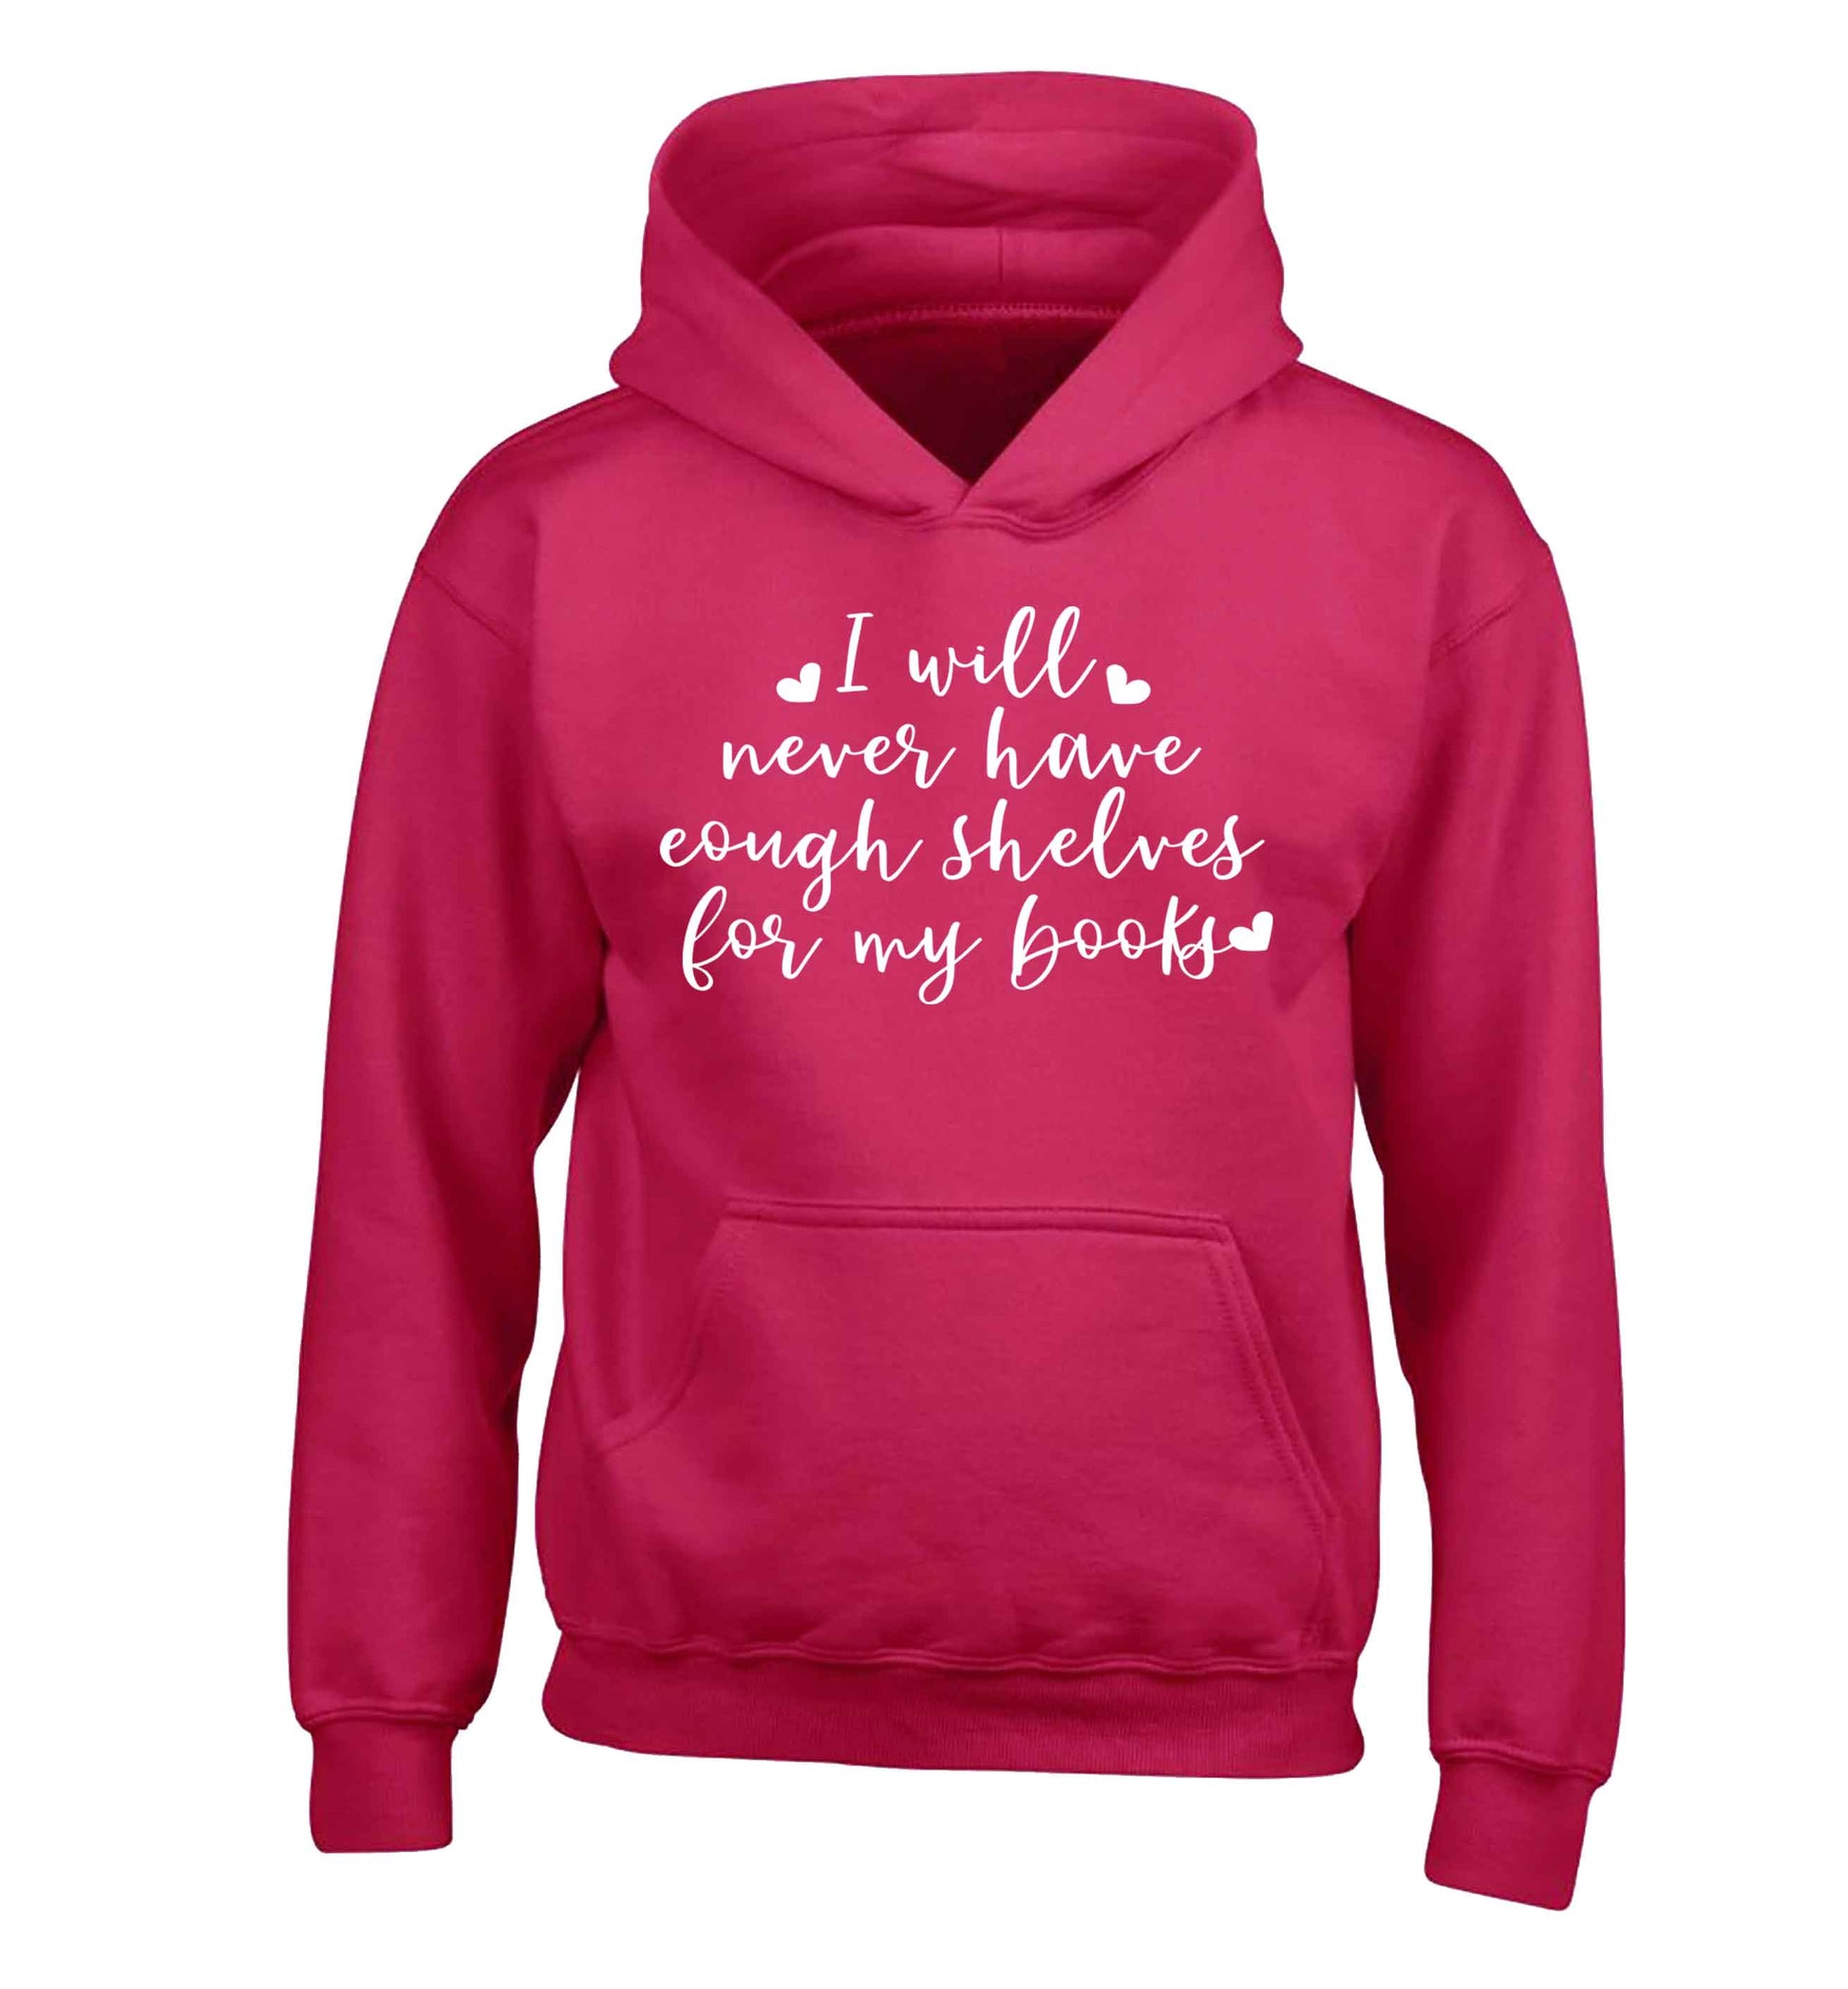 I will never have enough shelves for my books children's pink hoodie 12-13 Years